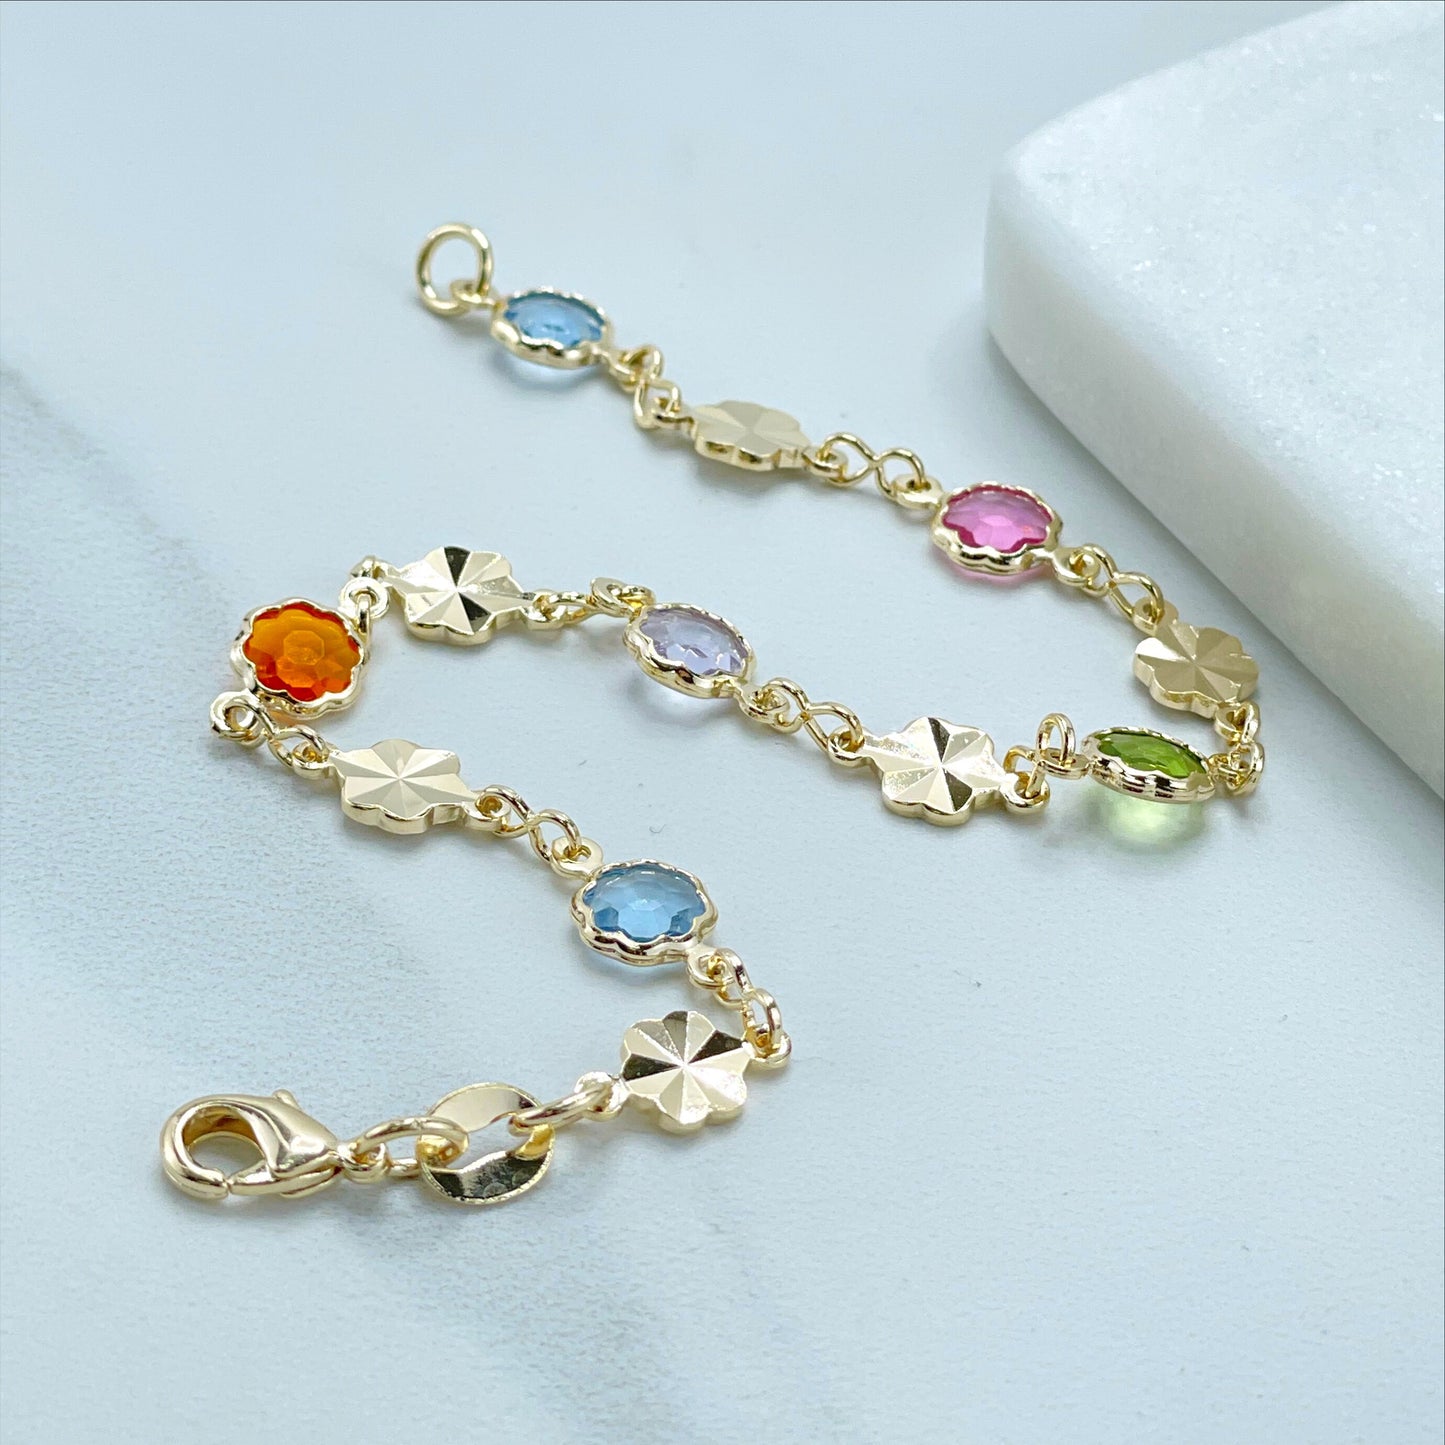 18k Gold Filled Flowers Colorful Stones Bracelet For Wholesale and Jewelry Supplies